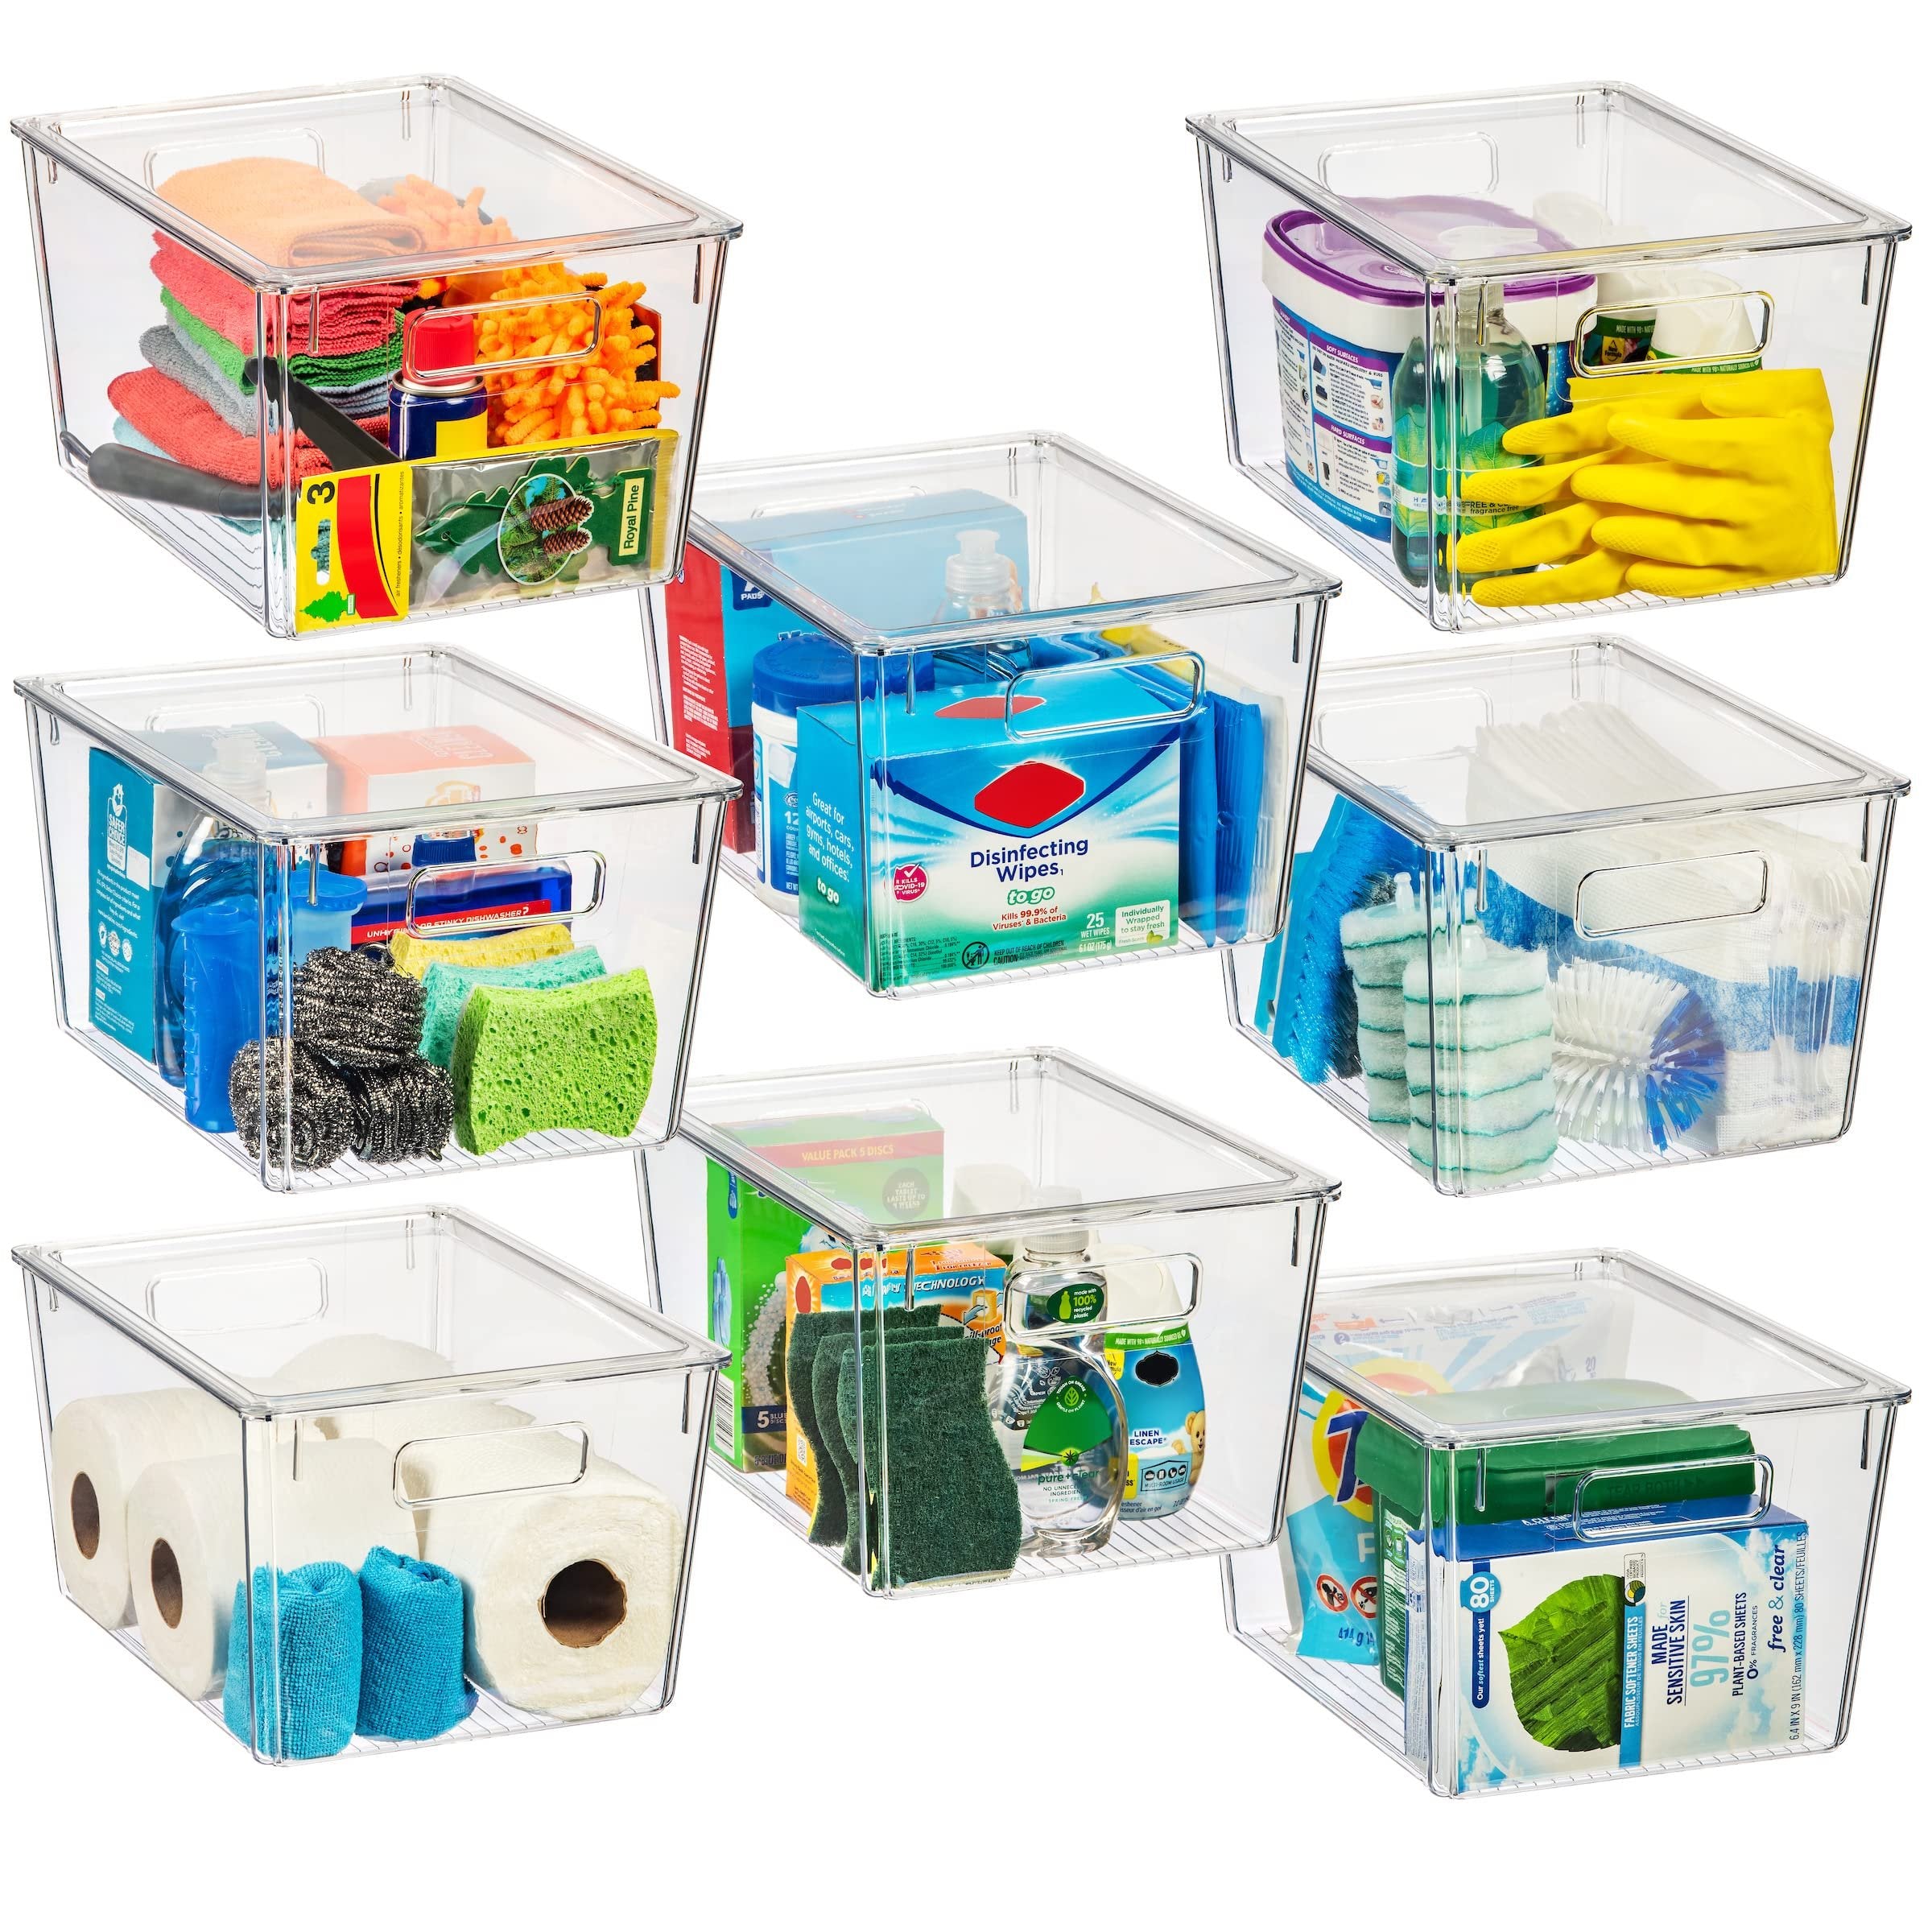 ClearSpace Plastic Storage Bins with Lids X-Large - Perfect Kitchen Organization or Pantry Storage - Fridge Organizer, Pantry Organization and Storage Bins, Cabinet Organizers